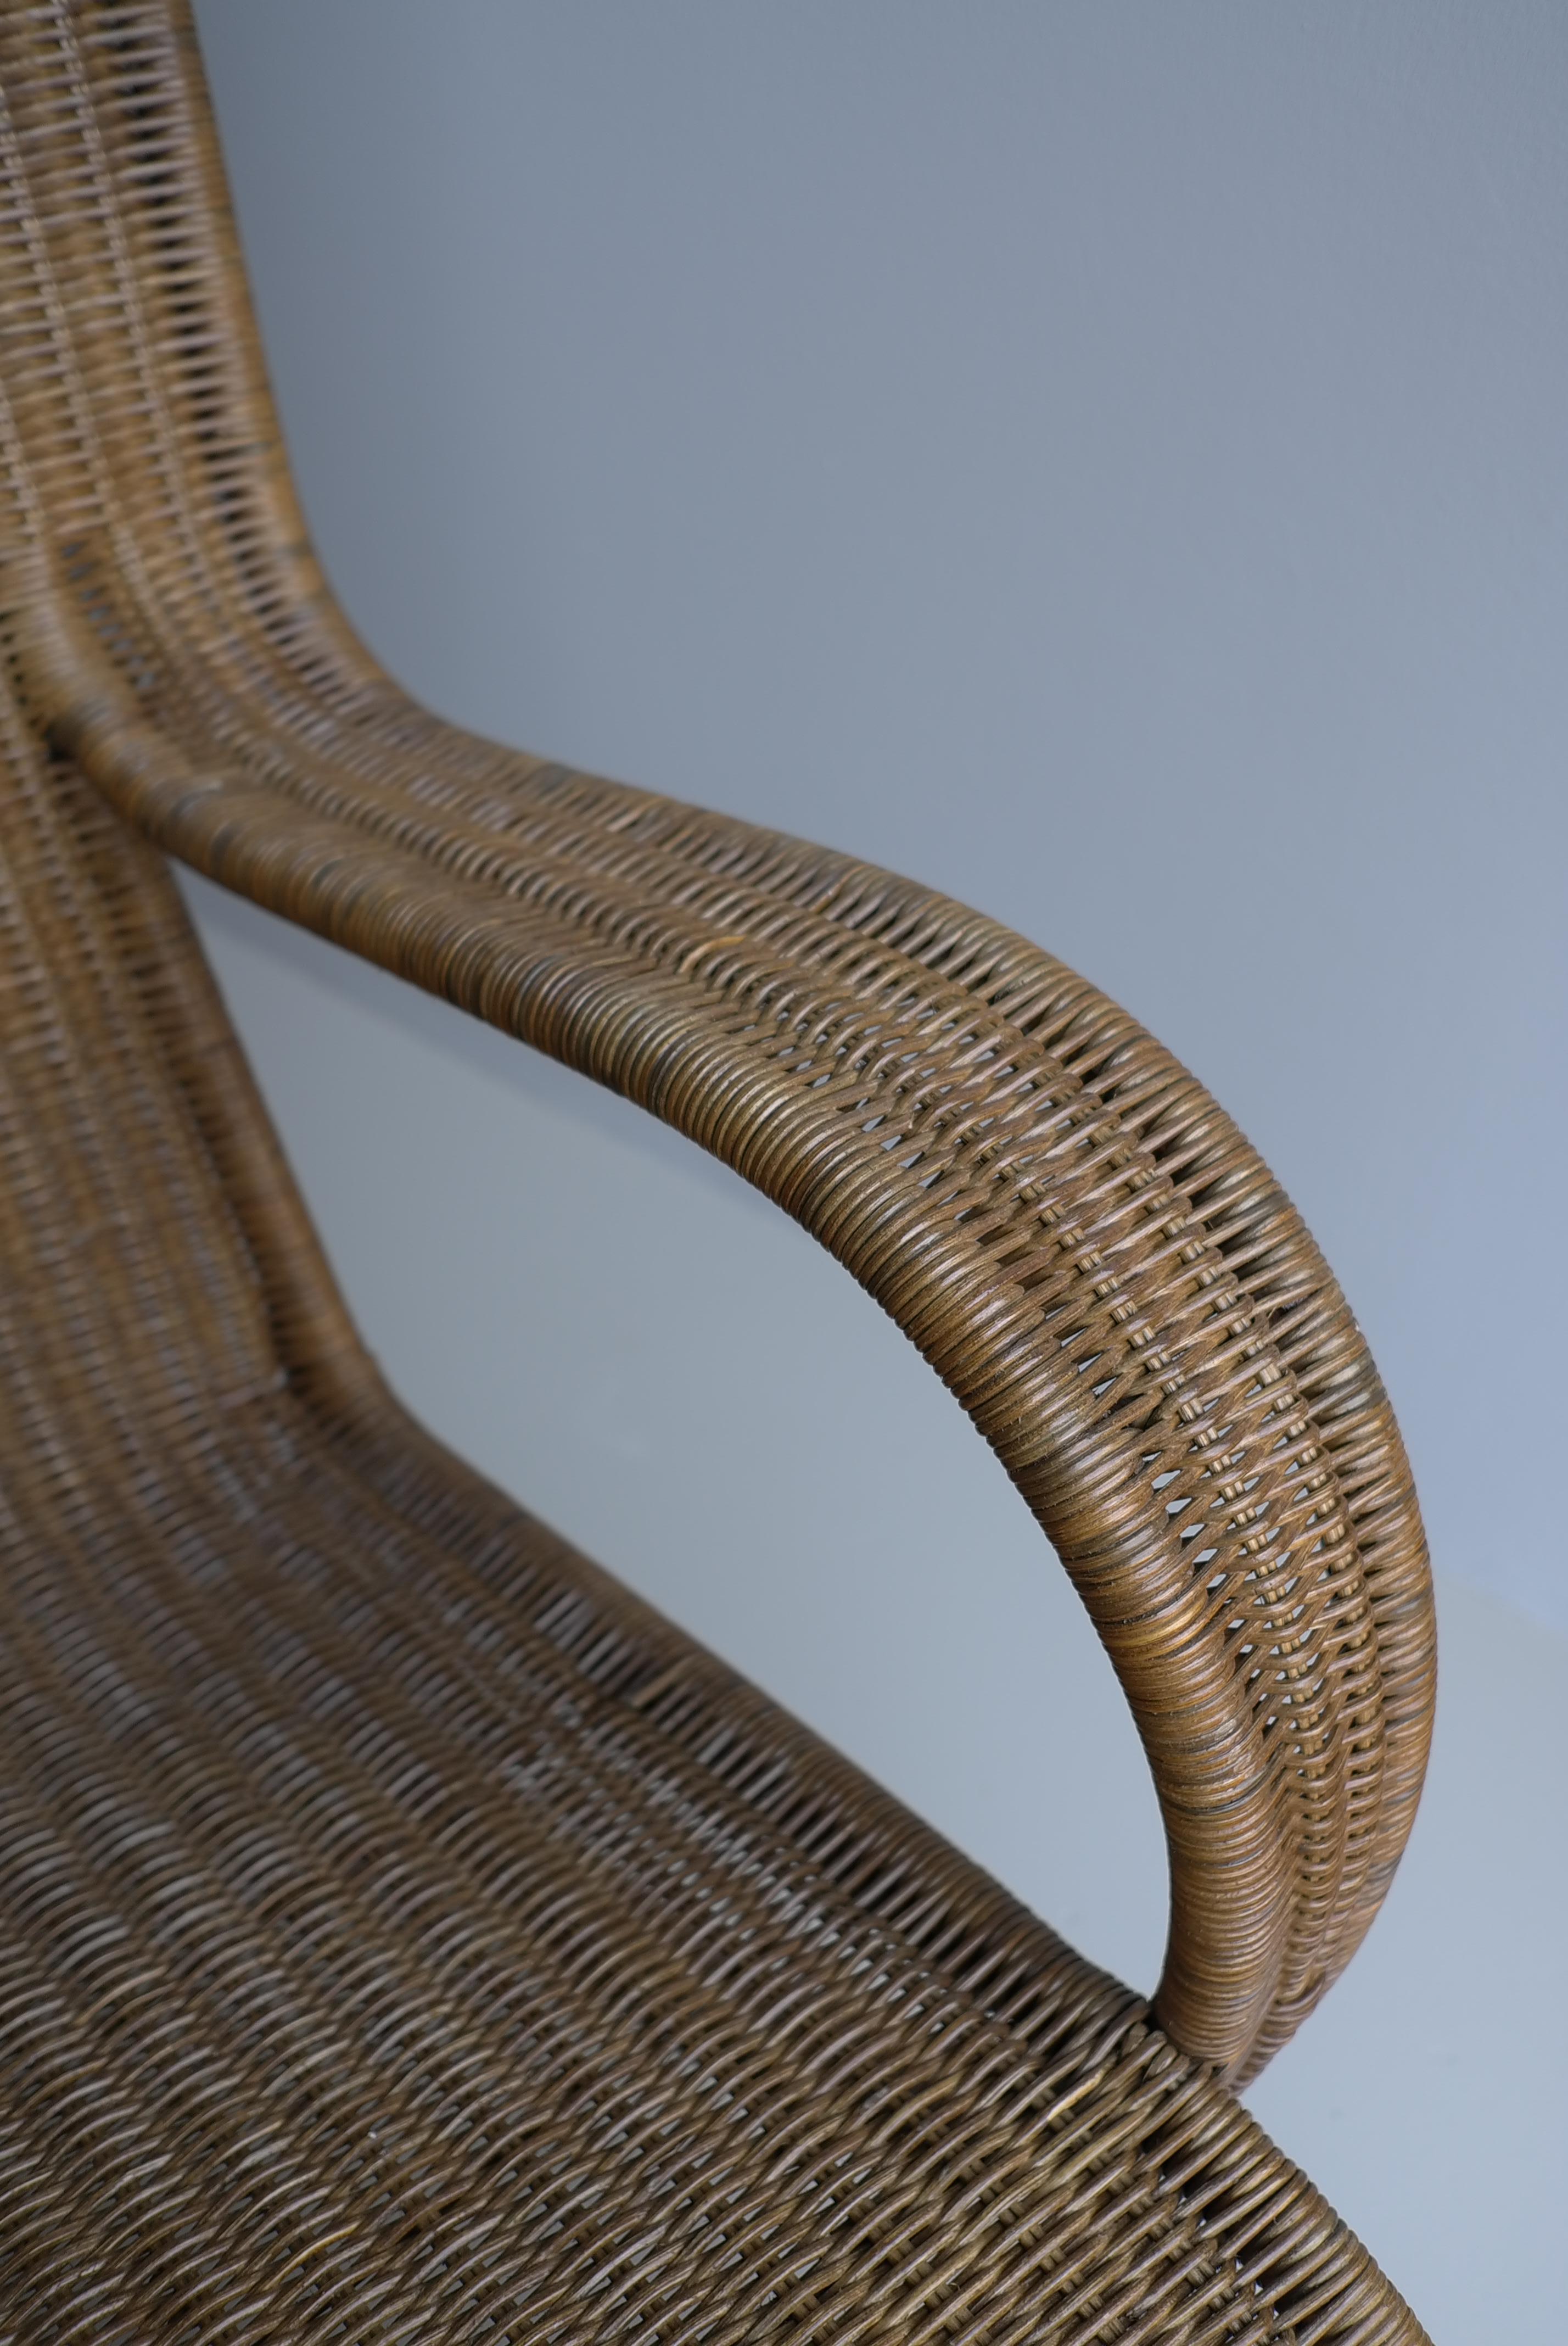 Large Sculptural Wicker Lounge Chair, France circa 1970 For Sale 1